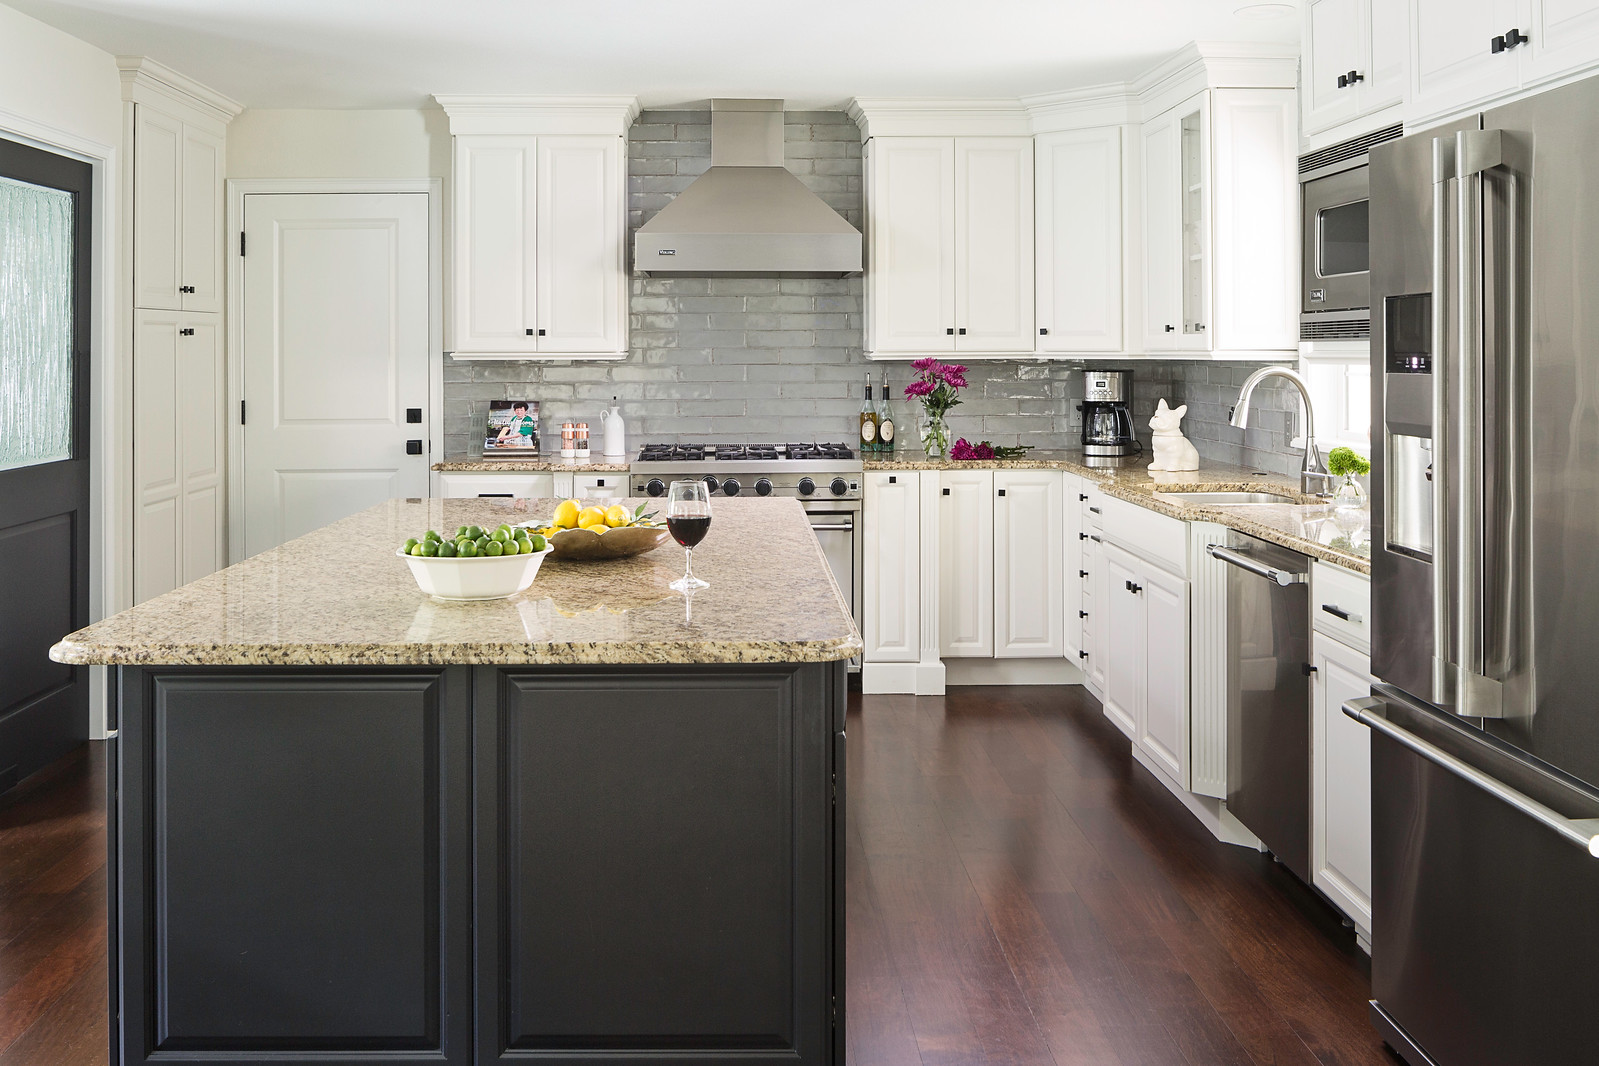 An image showing subway tiles in the kitchen as stove top backsplash as well as wall tiles above the counter tops 